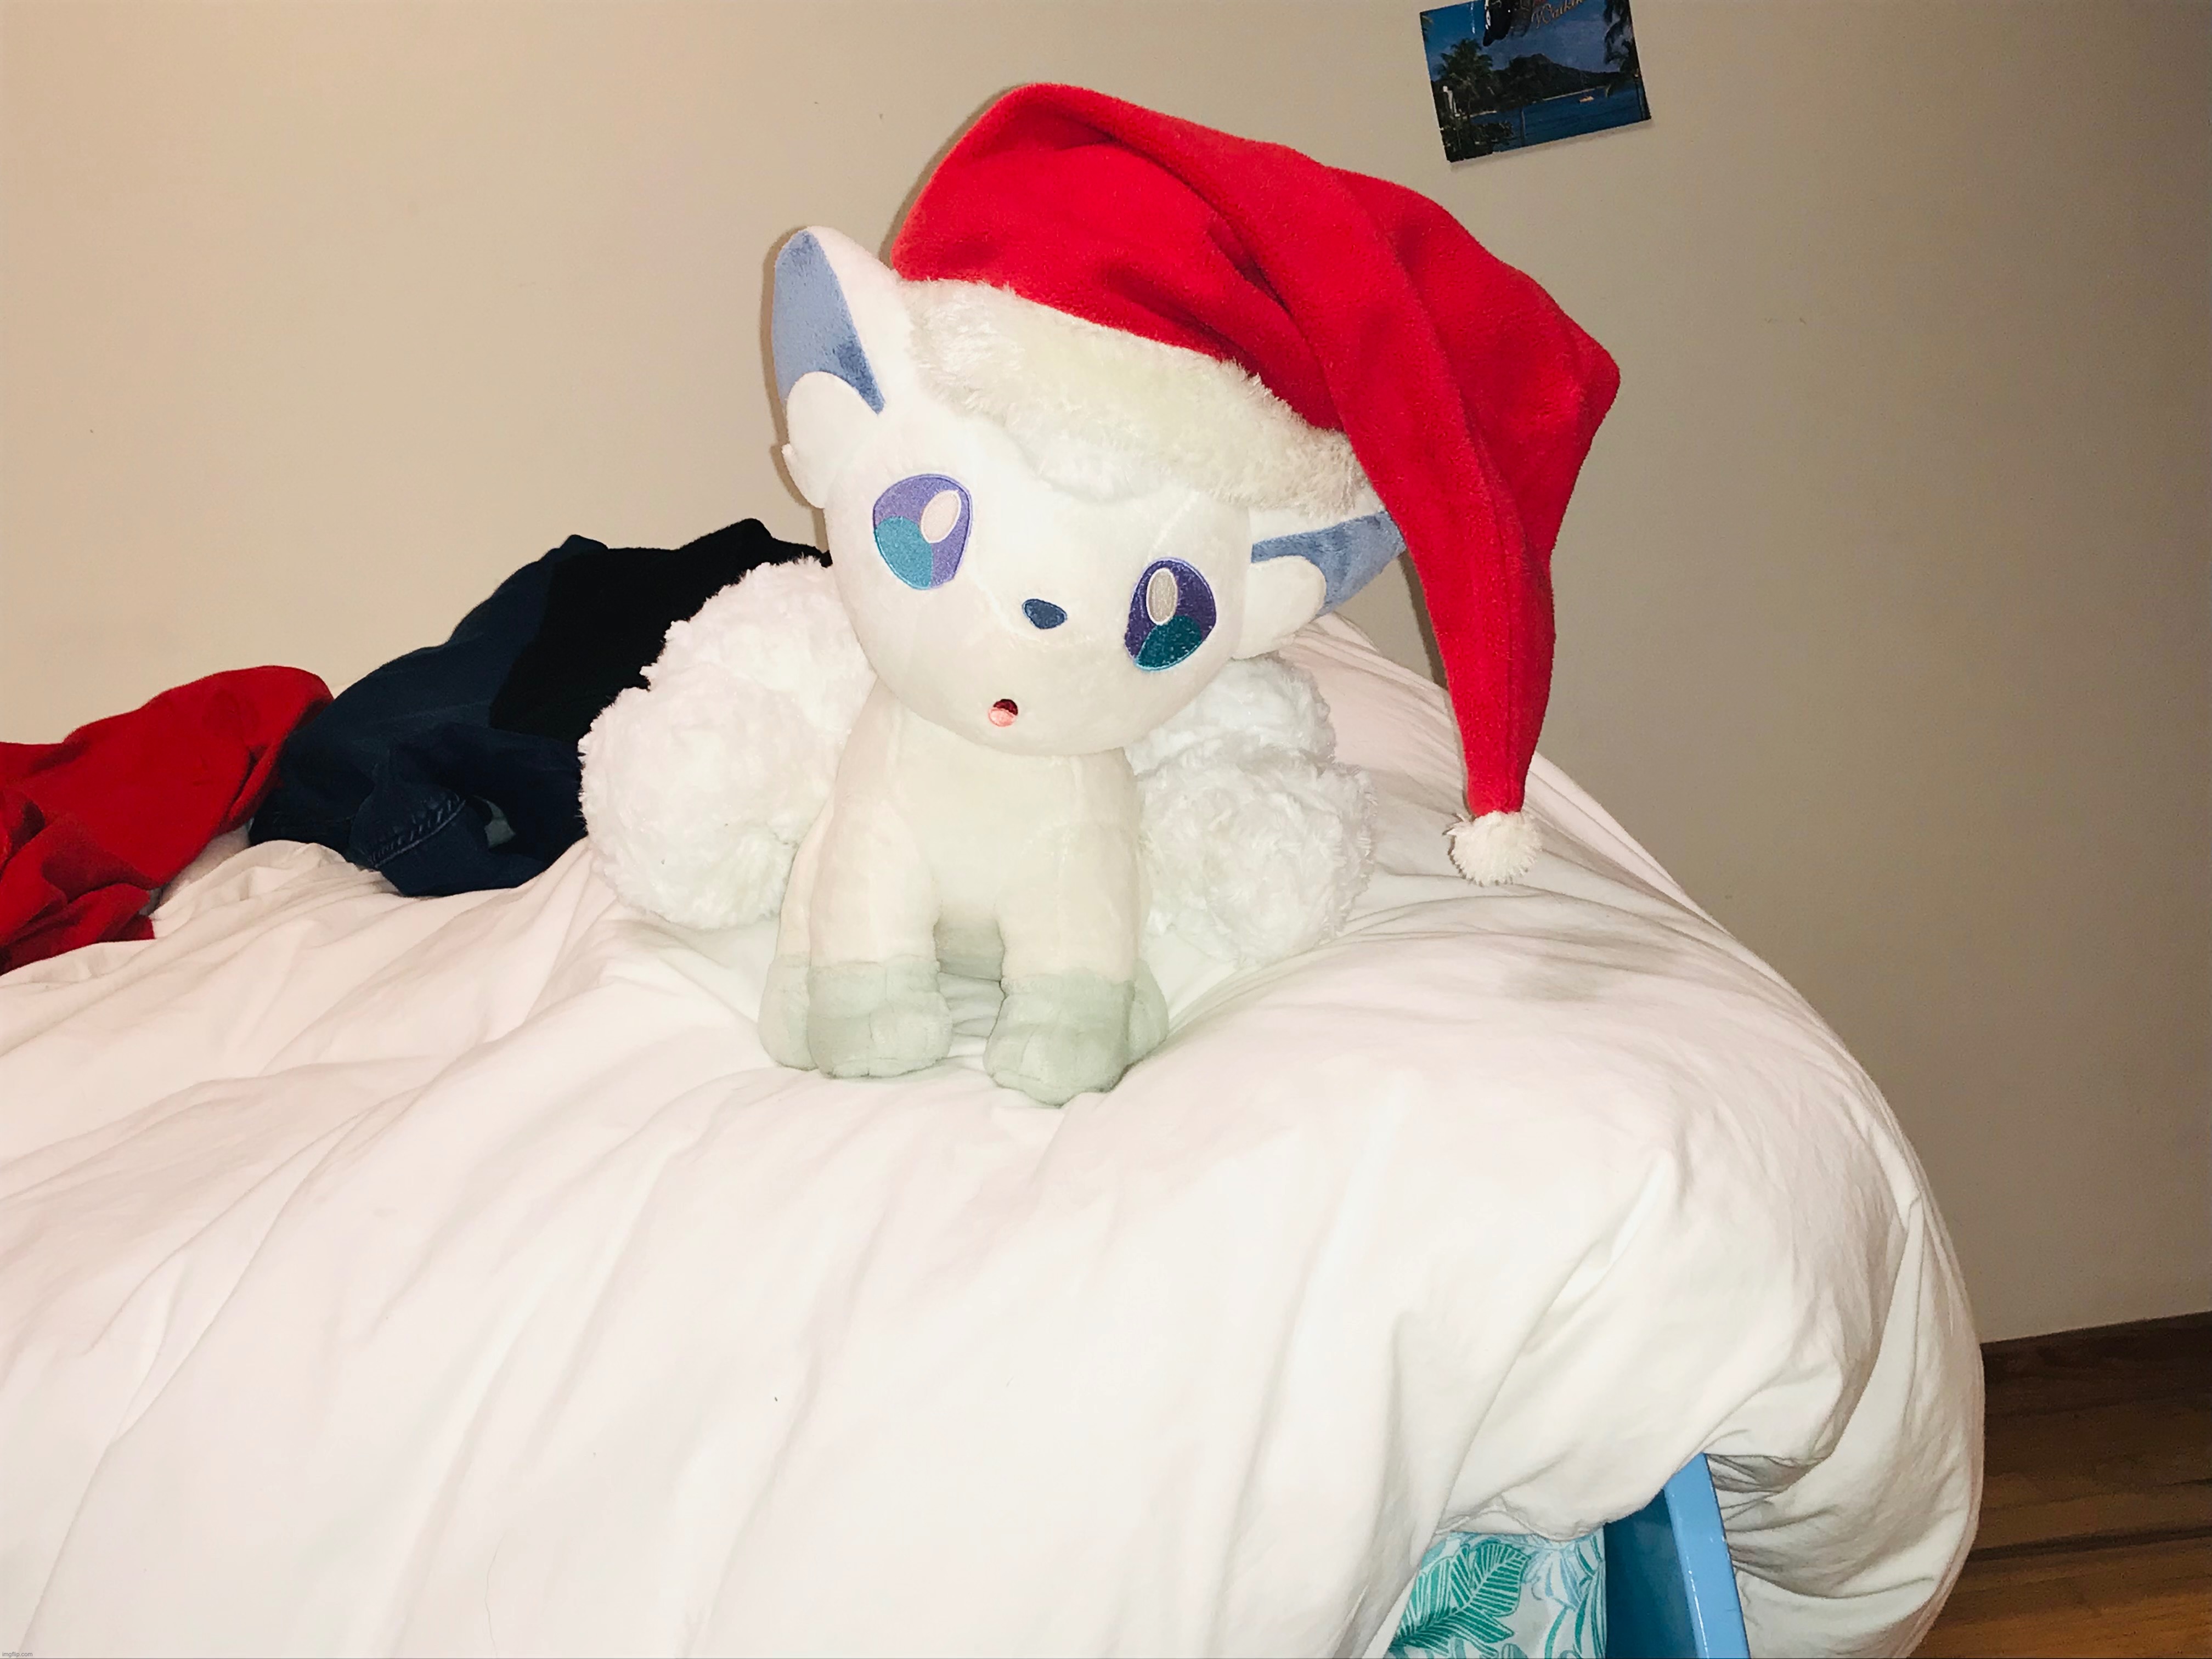 MERRY CHRISTMAS EVERYBODY! here’s a picture of my Alolan Vulpix plushie! | image tagged in merry christmas | made w/ Imgflip meme maker